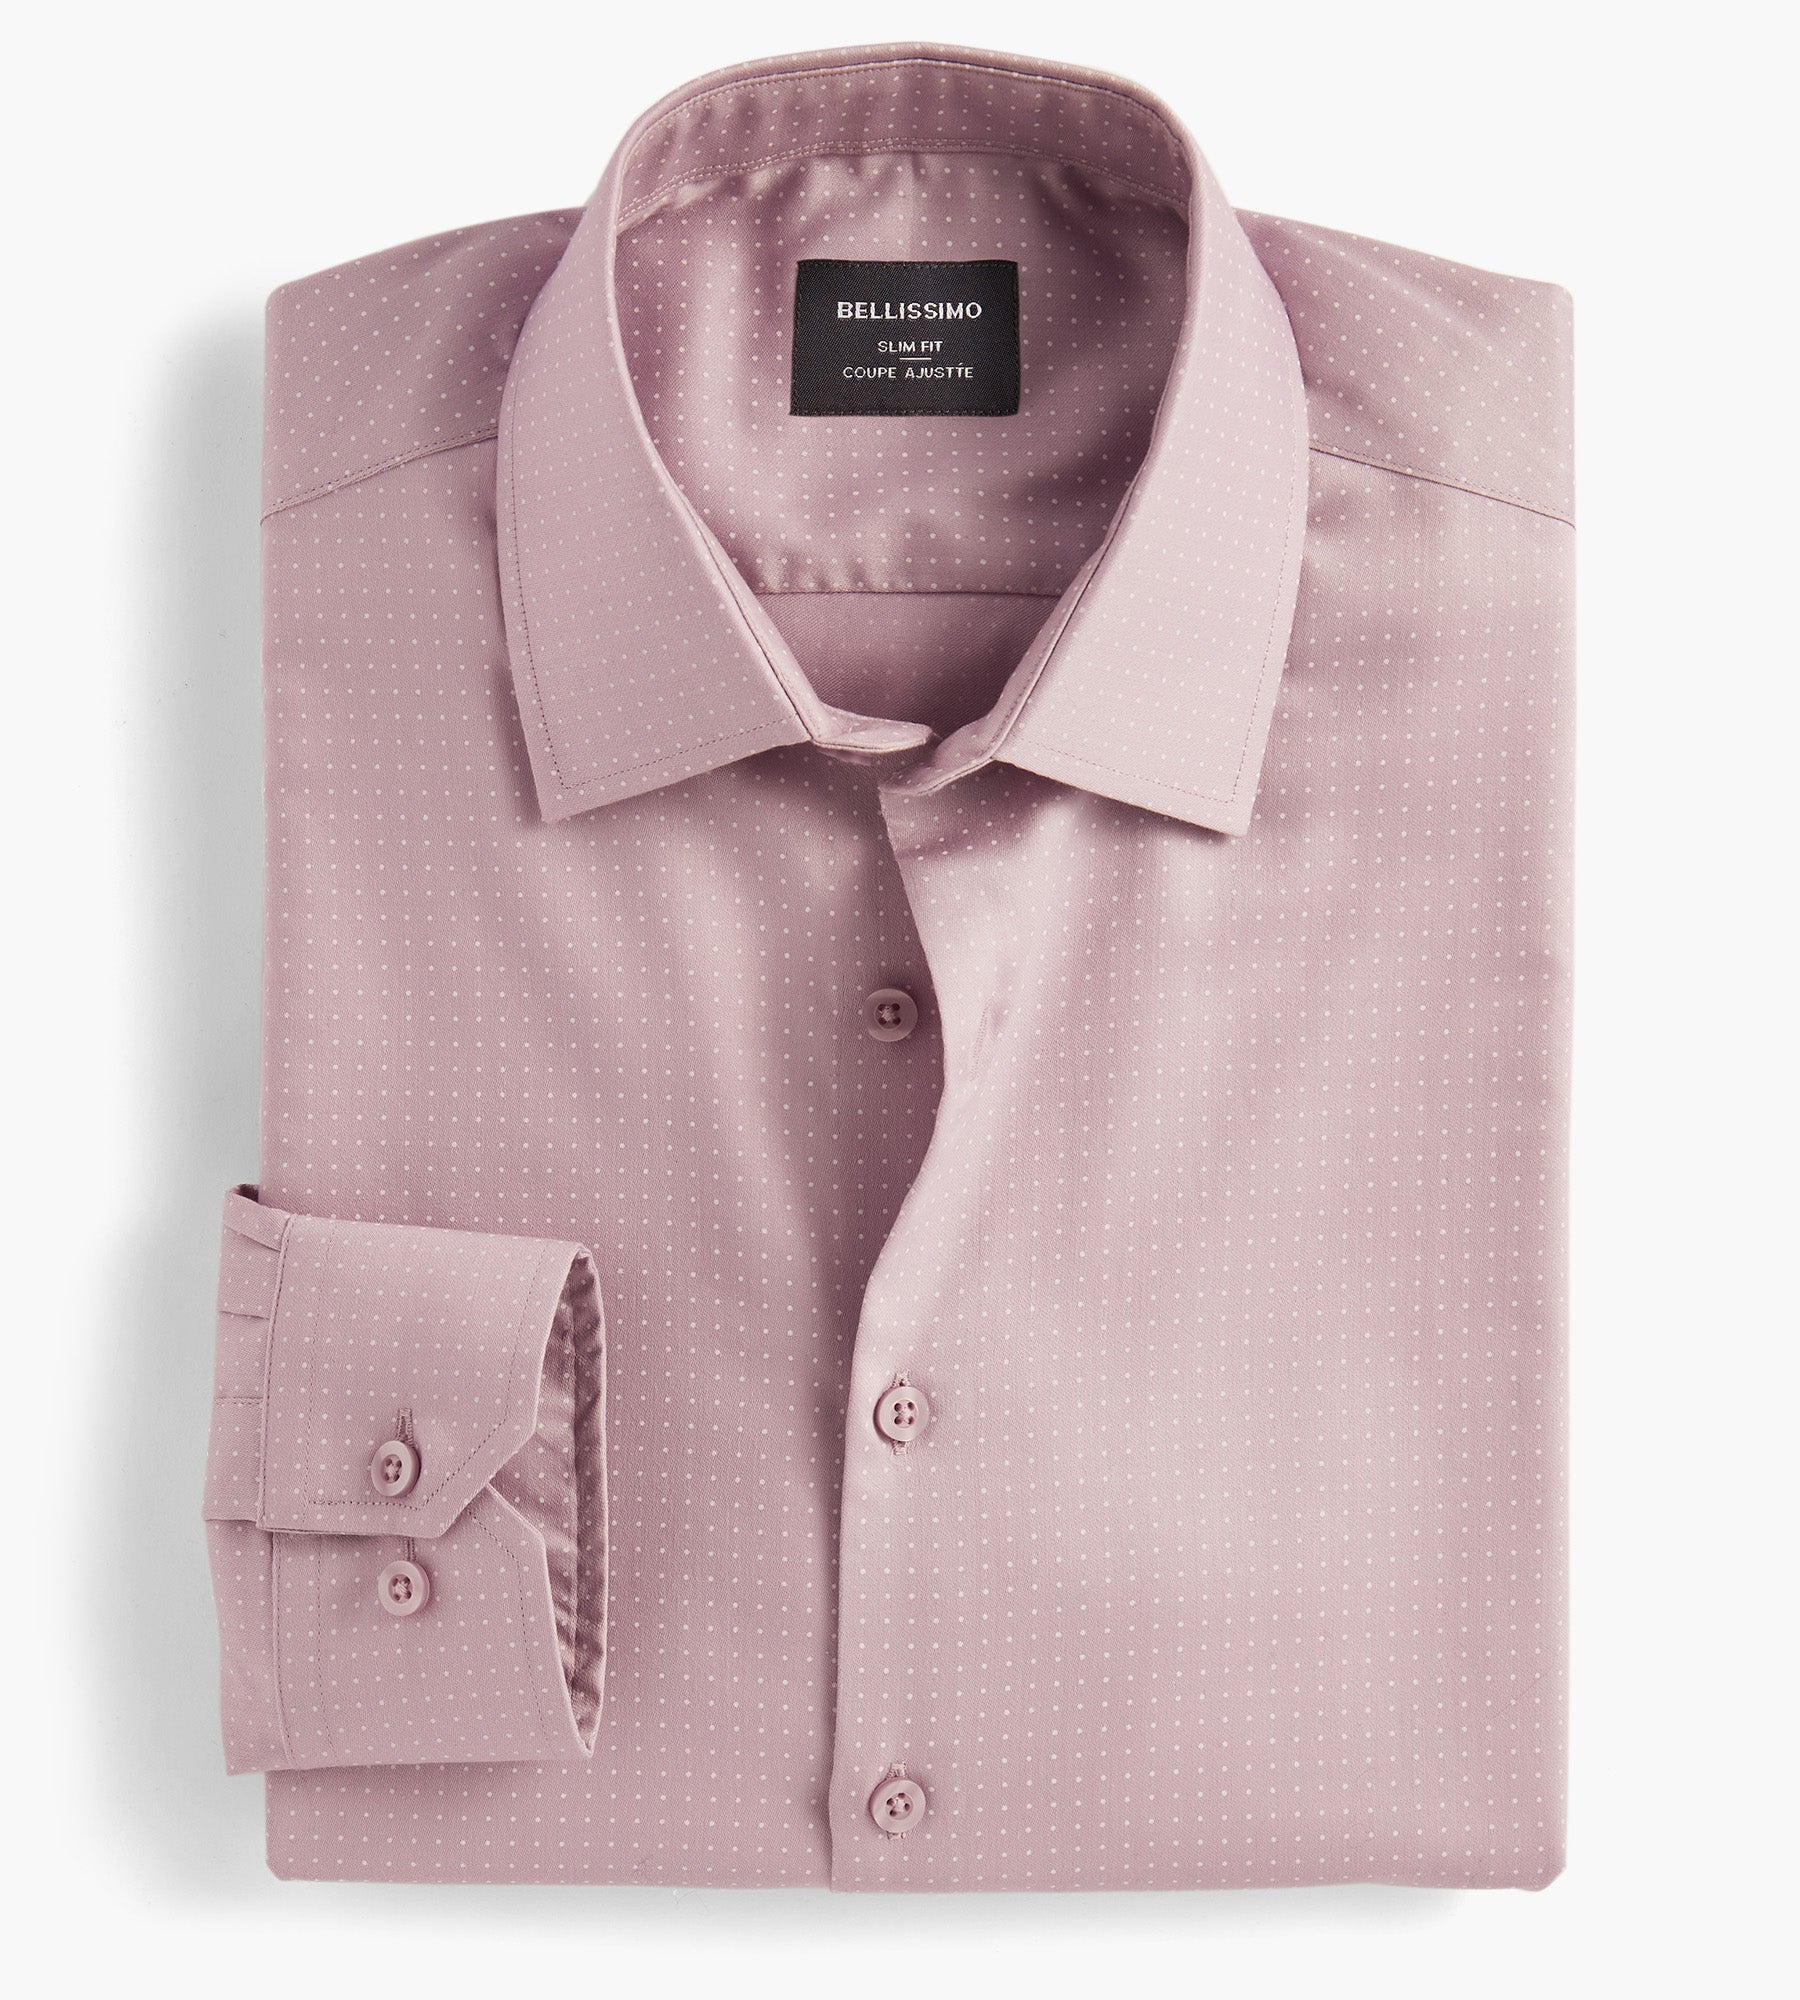 Shop the Bellissimo Men's Clothing Brand – Tip Top